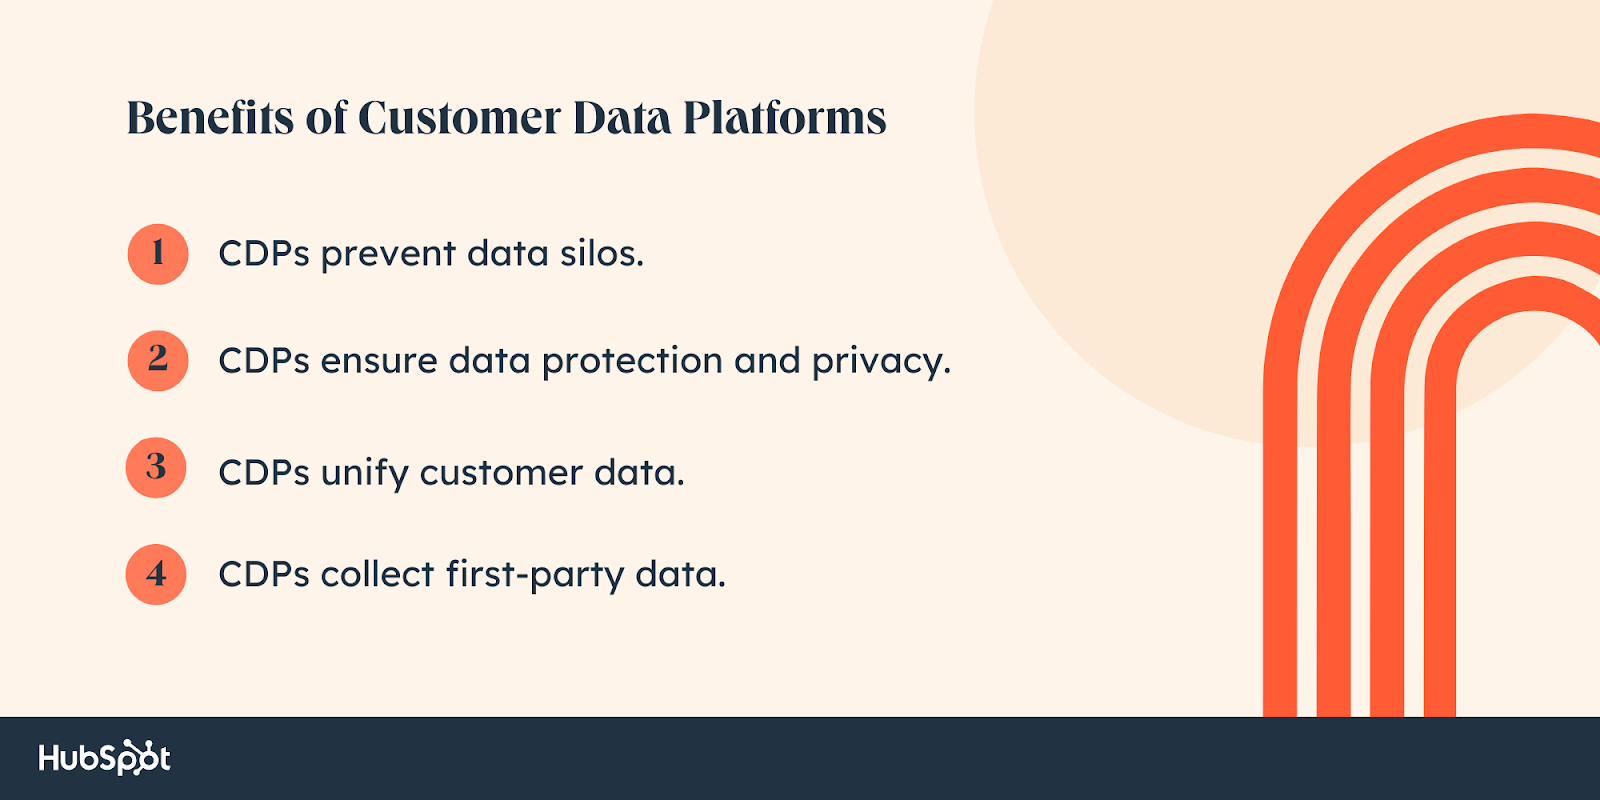 cdp benefits, prevent data silos, ensure data protection, unify customer data, collect first-party data